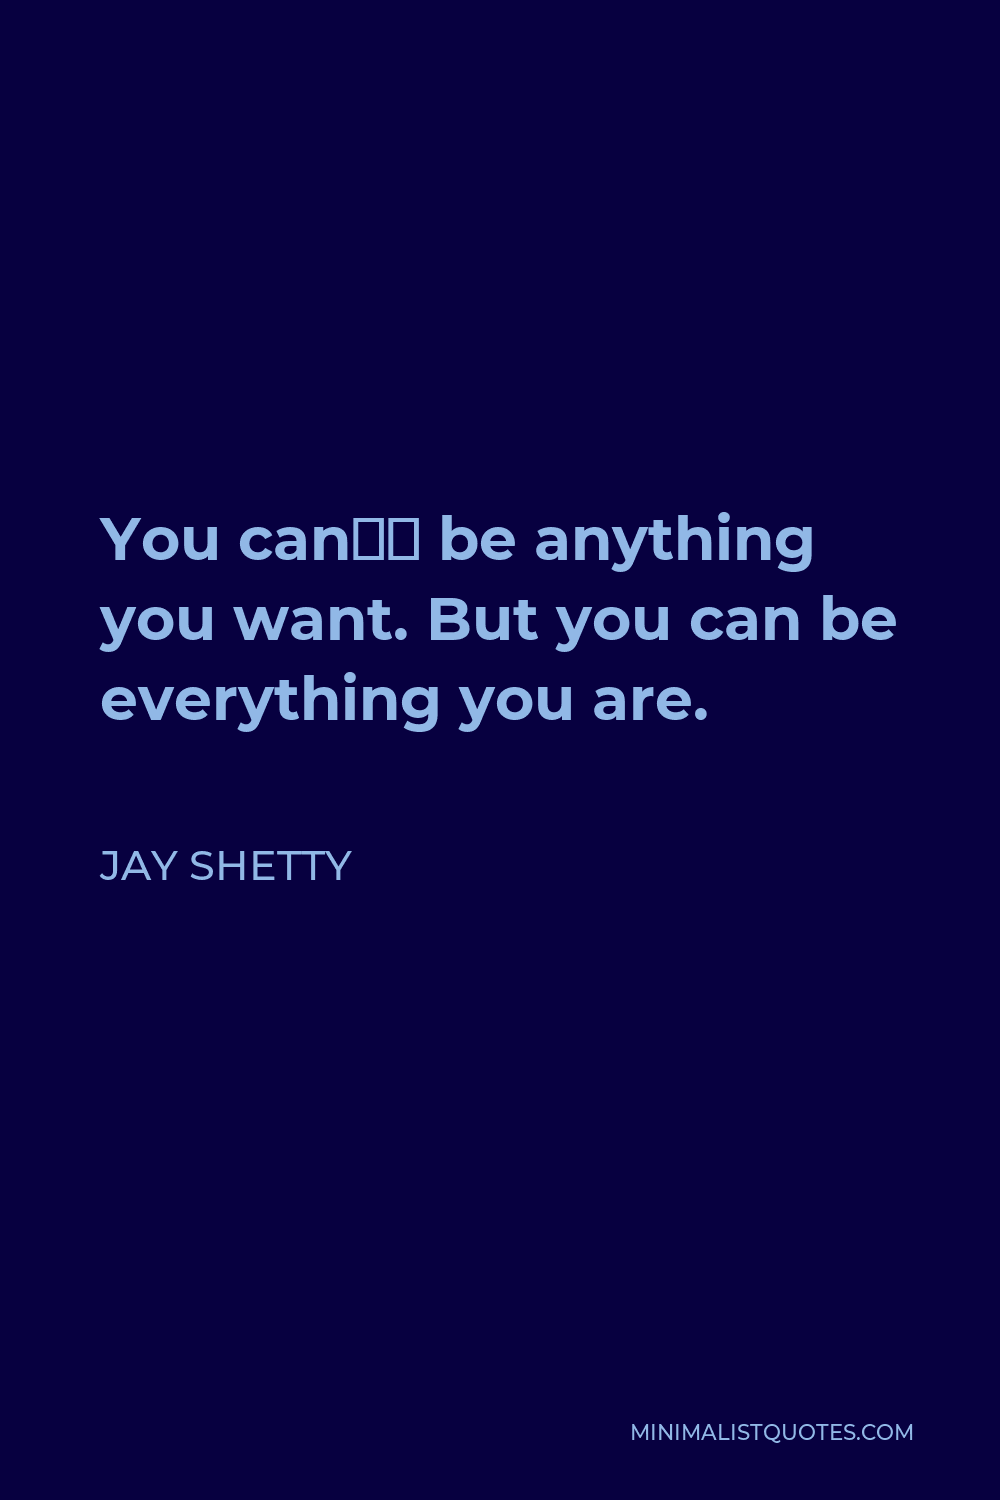 Jay Shetty Quote - You can’t be anything you want. But you can be everything you are.